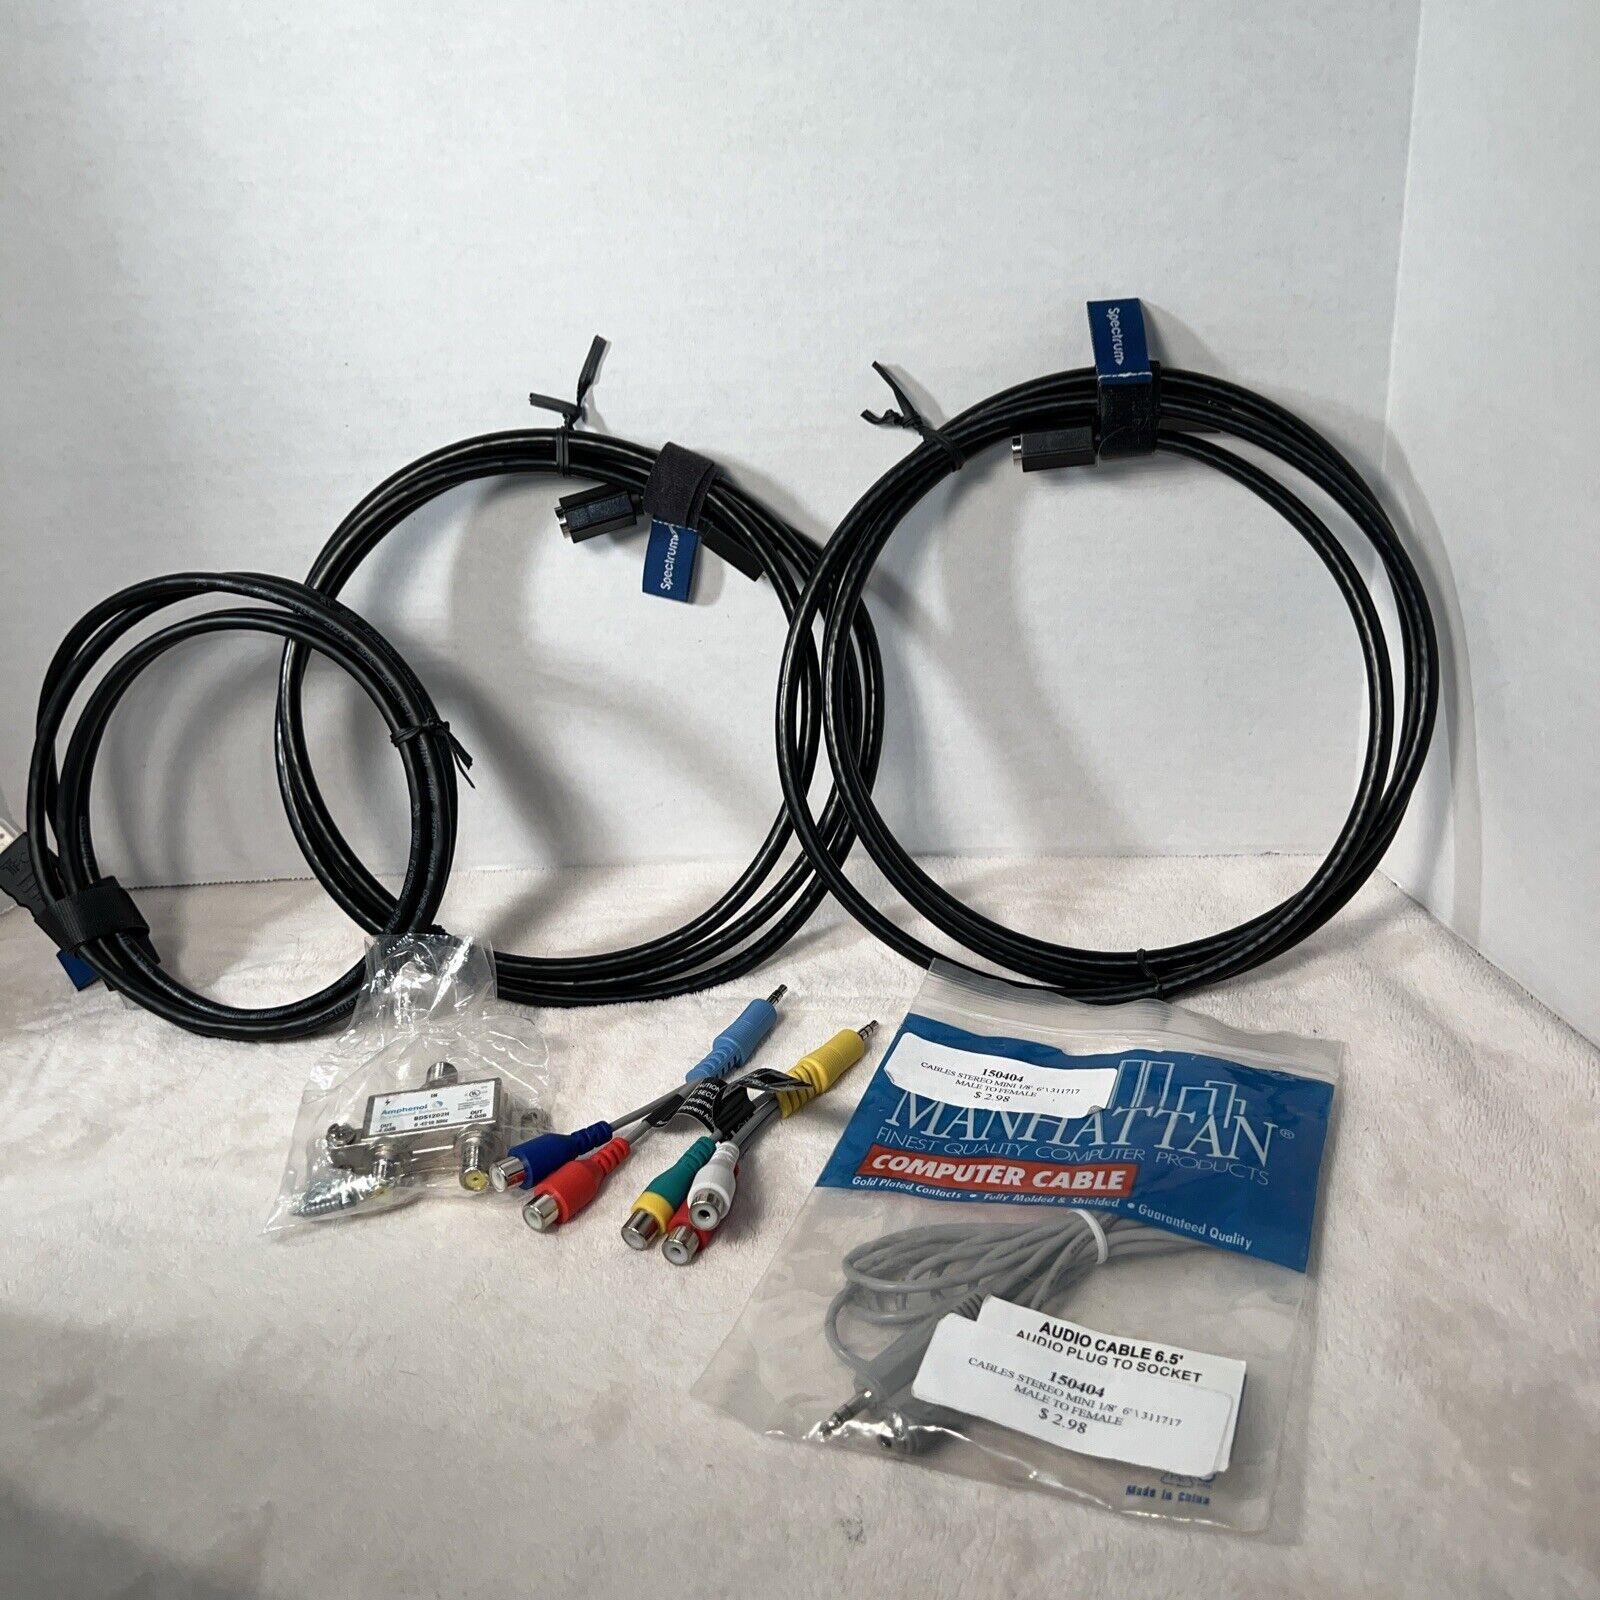 Combo Of Cables Spectrum HDMI & Amphenol BDS1202H & Manhattan Computer Cable 